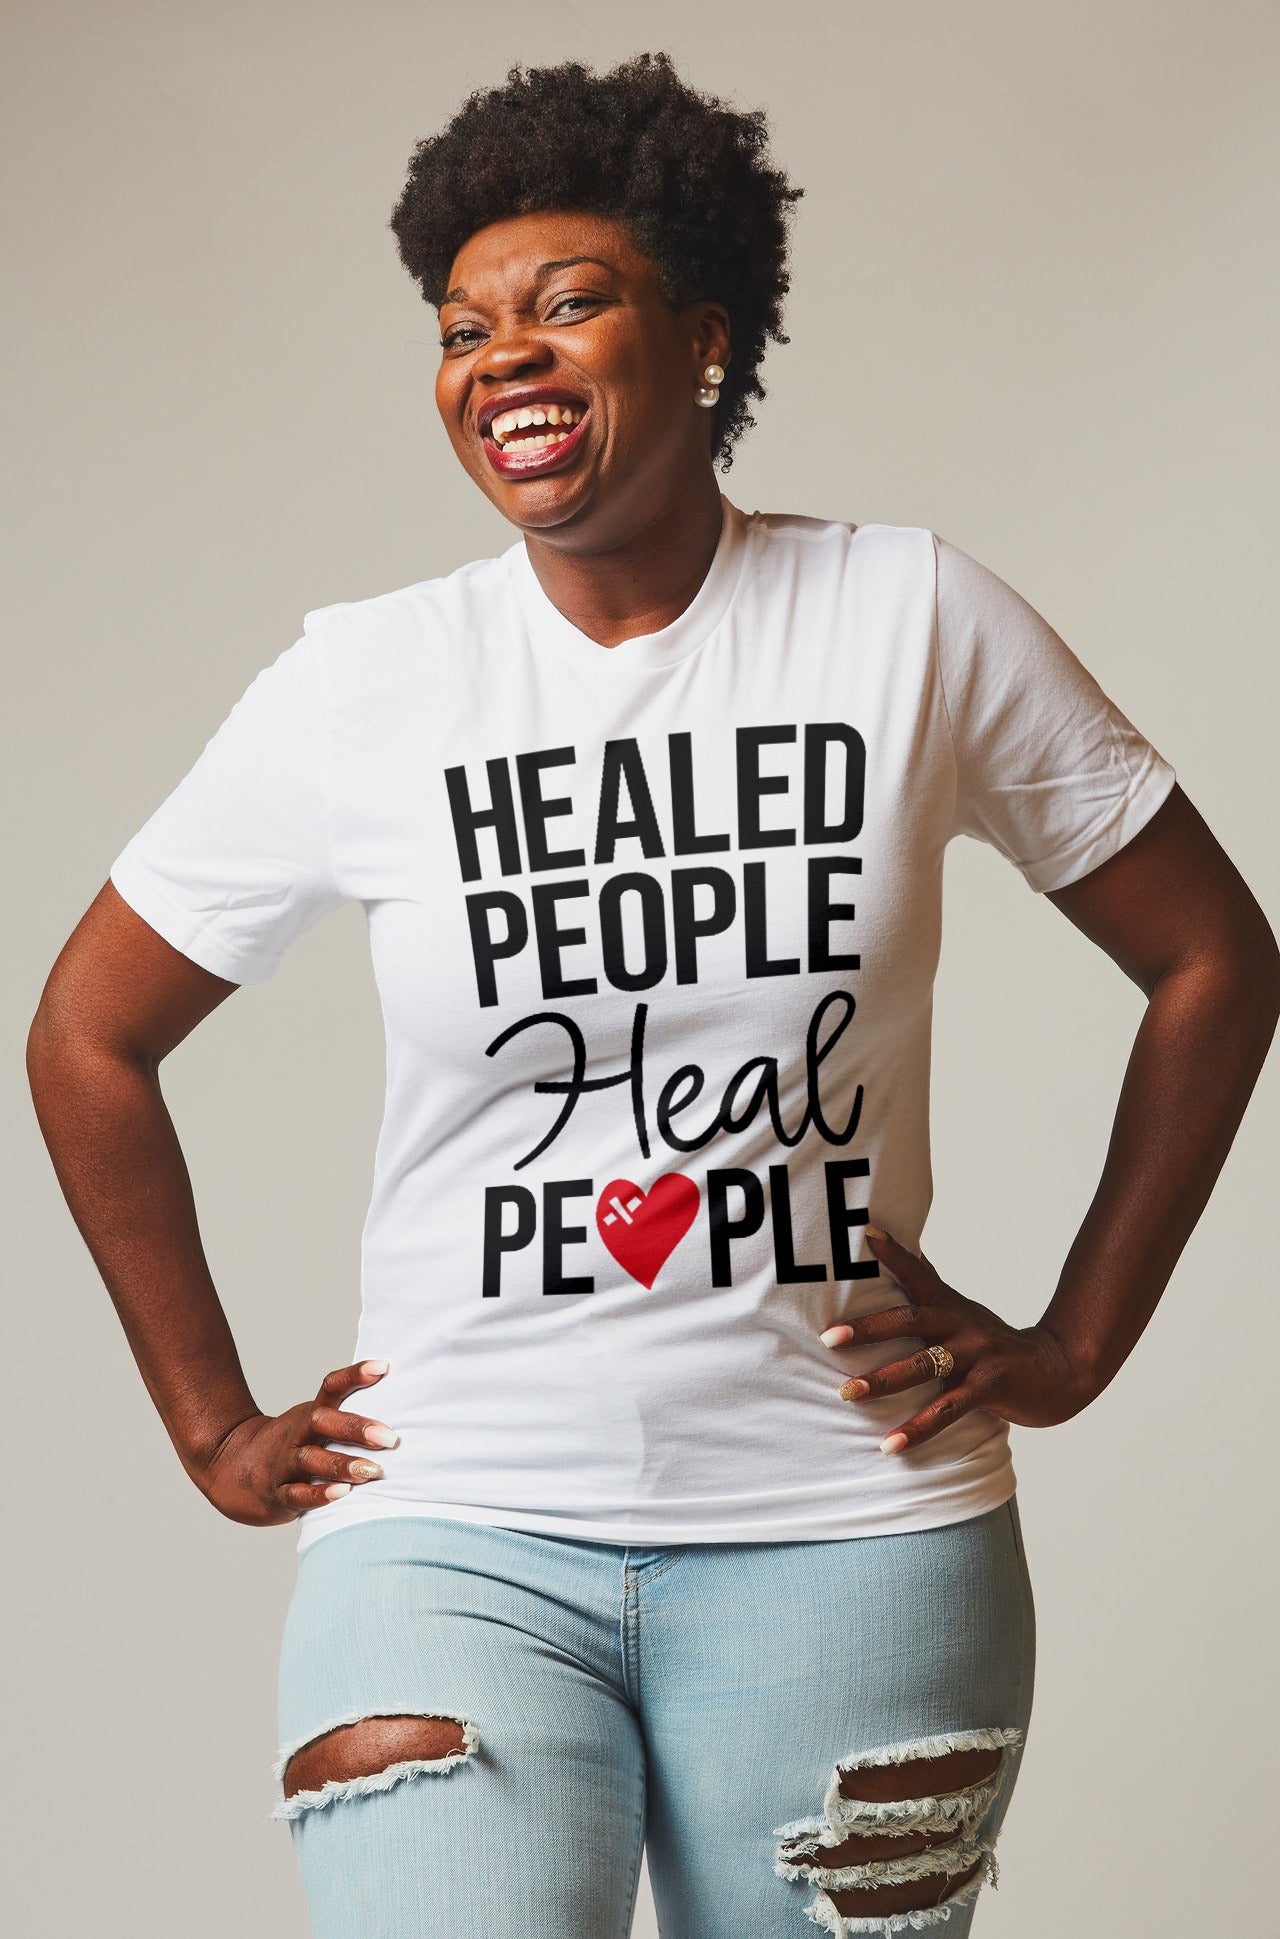 "Healed People Heal People" Short-Sleeve Unisex women's T-Shirt - The Fearless Shop